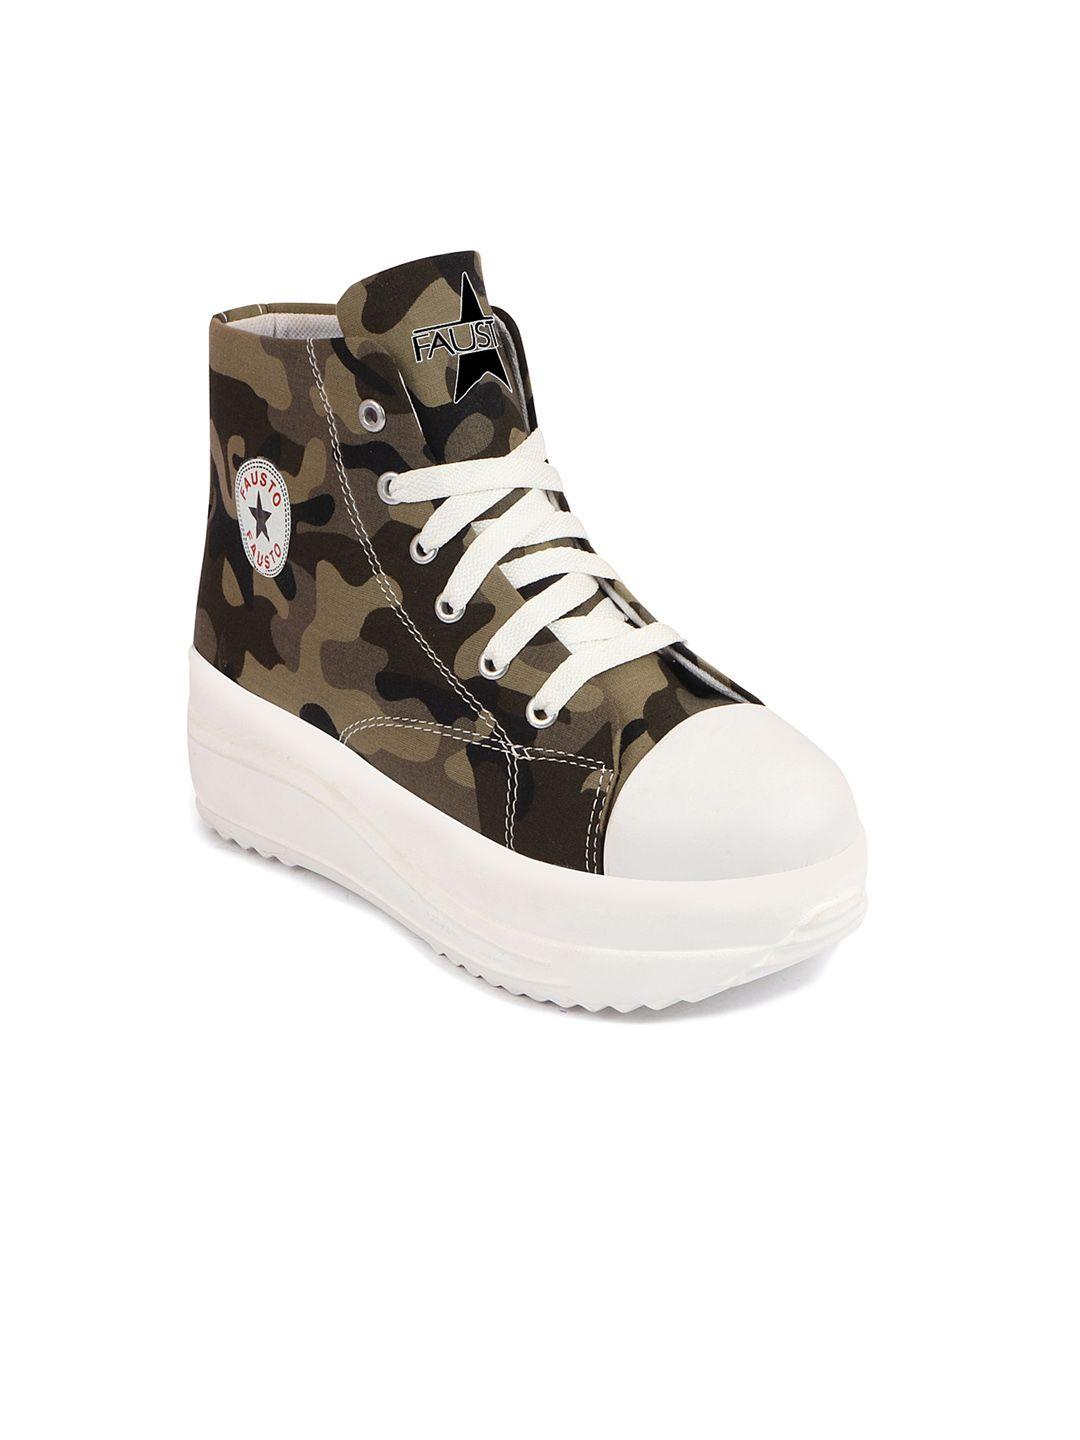 fausto women printed mid top lightweight canvas sneakers